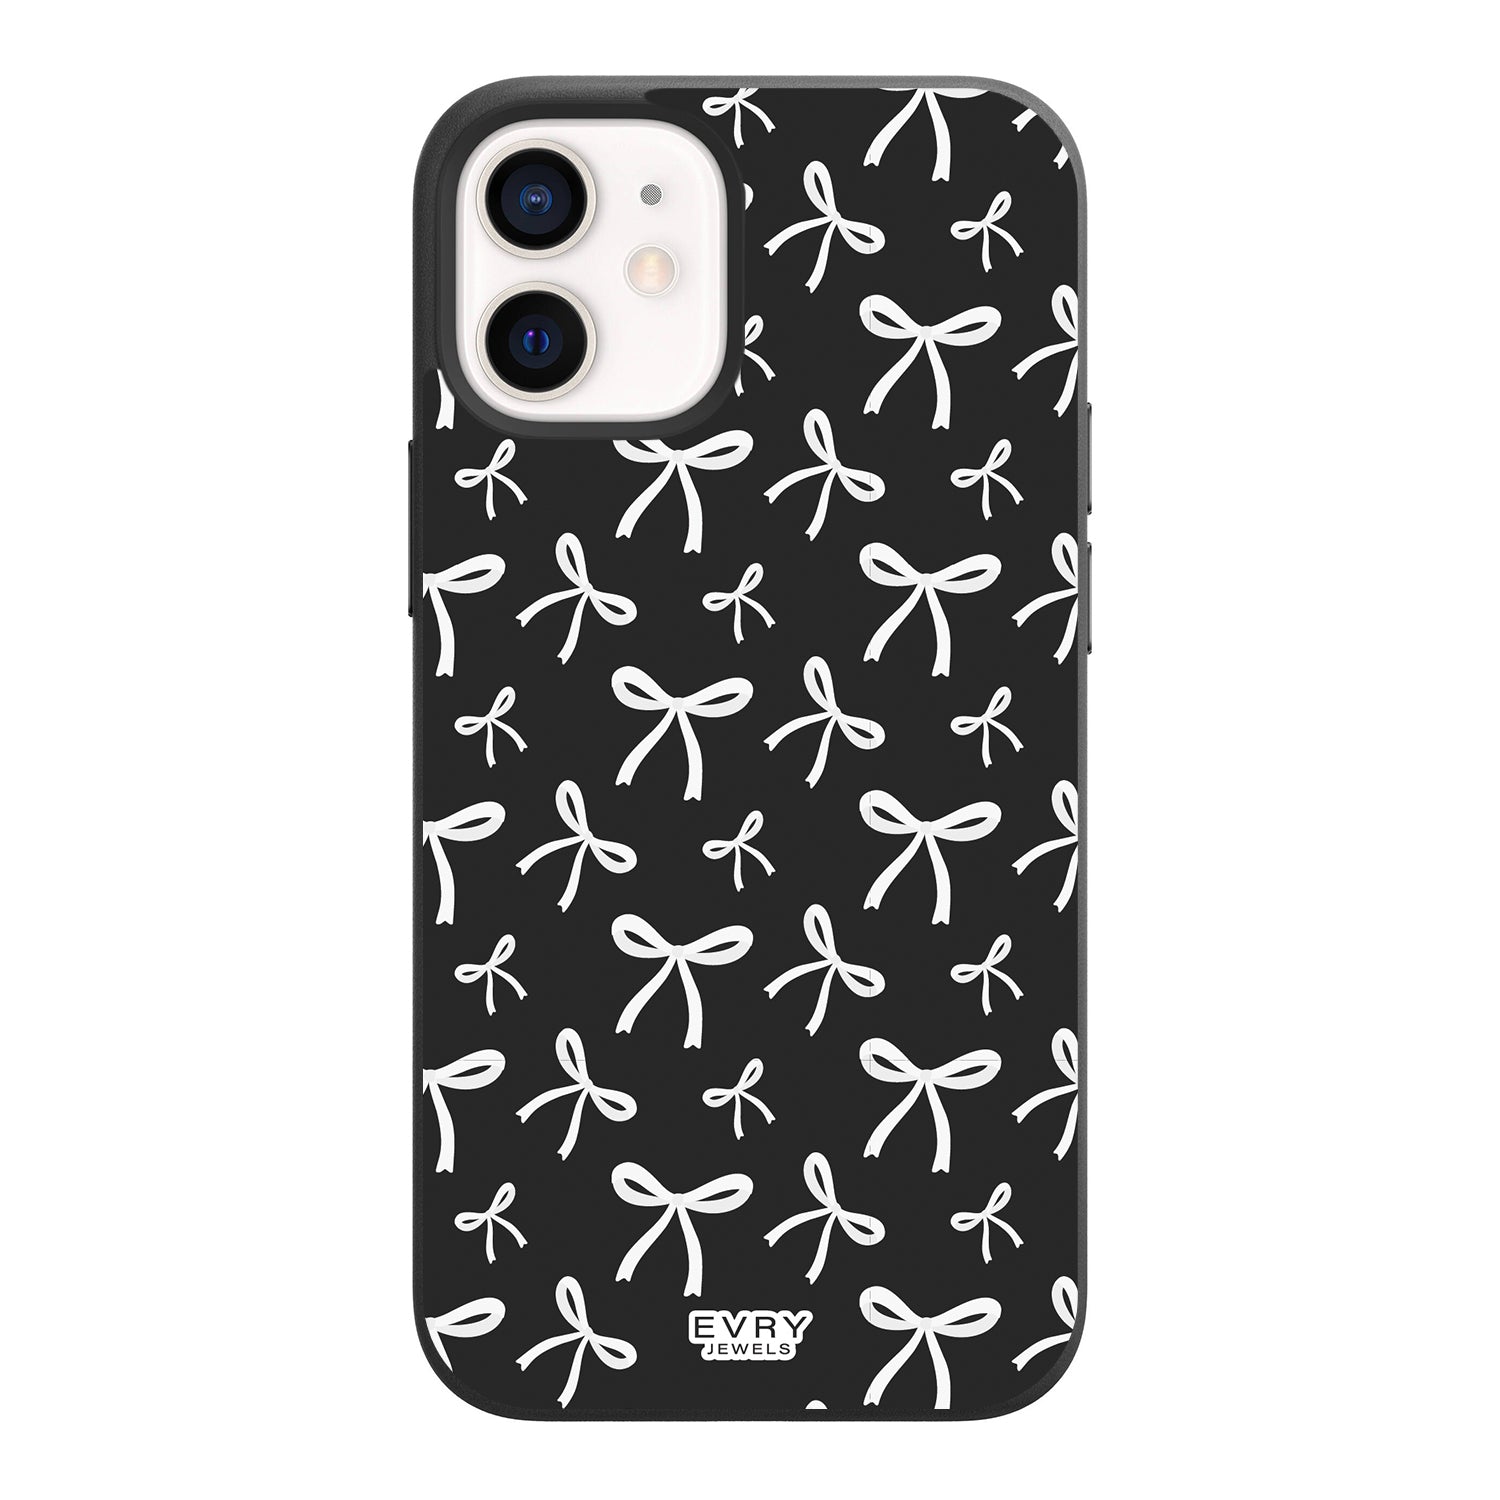 Put a Bow on it Phone Case